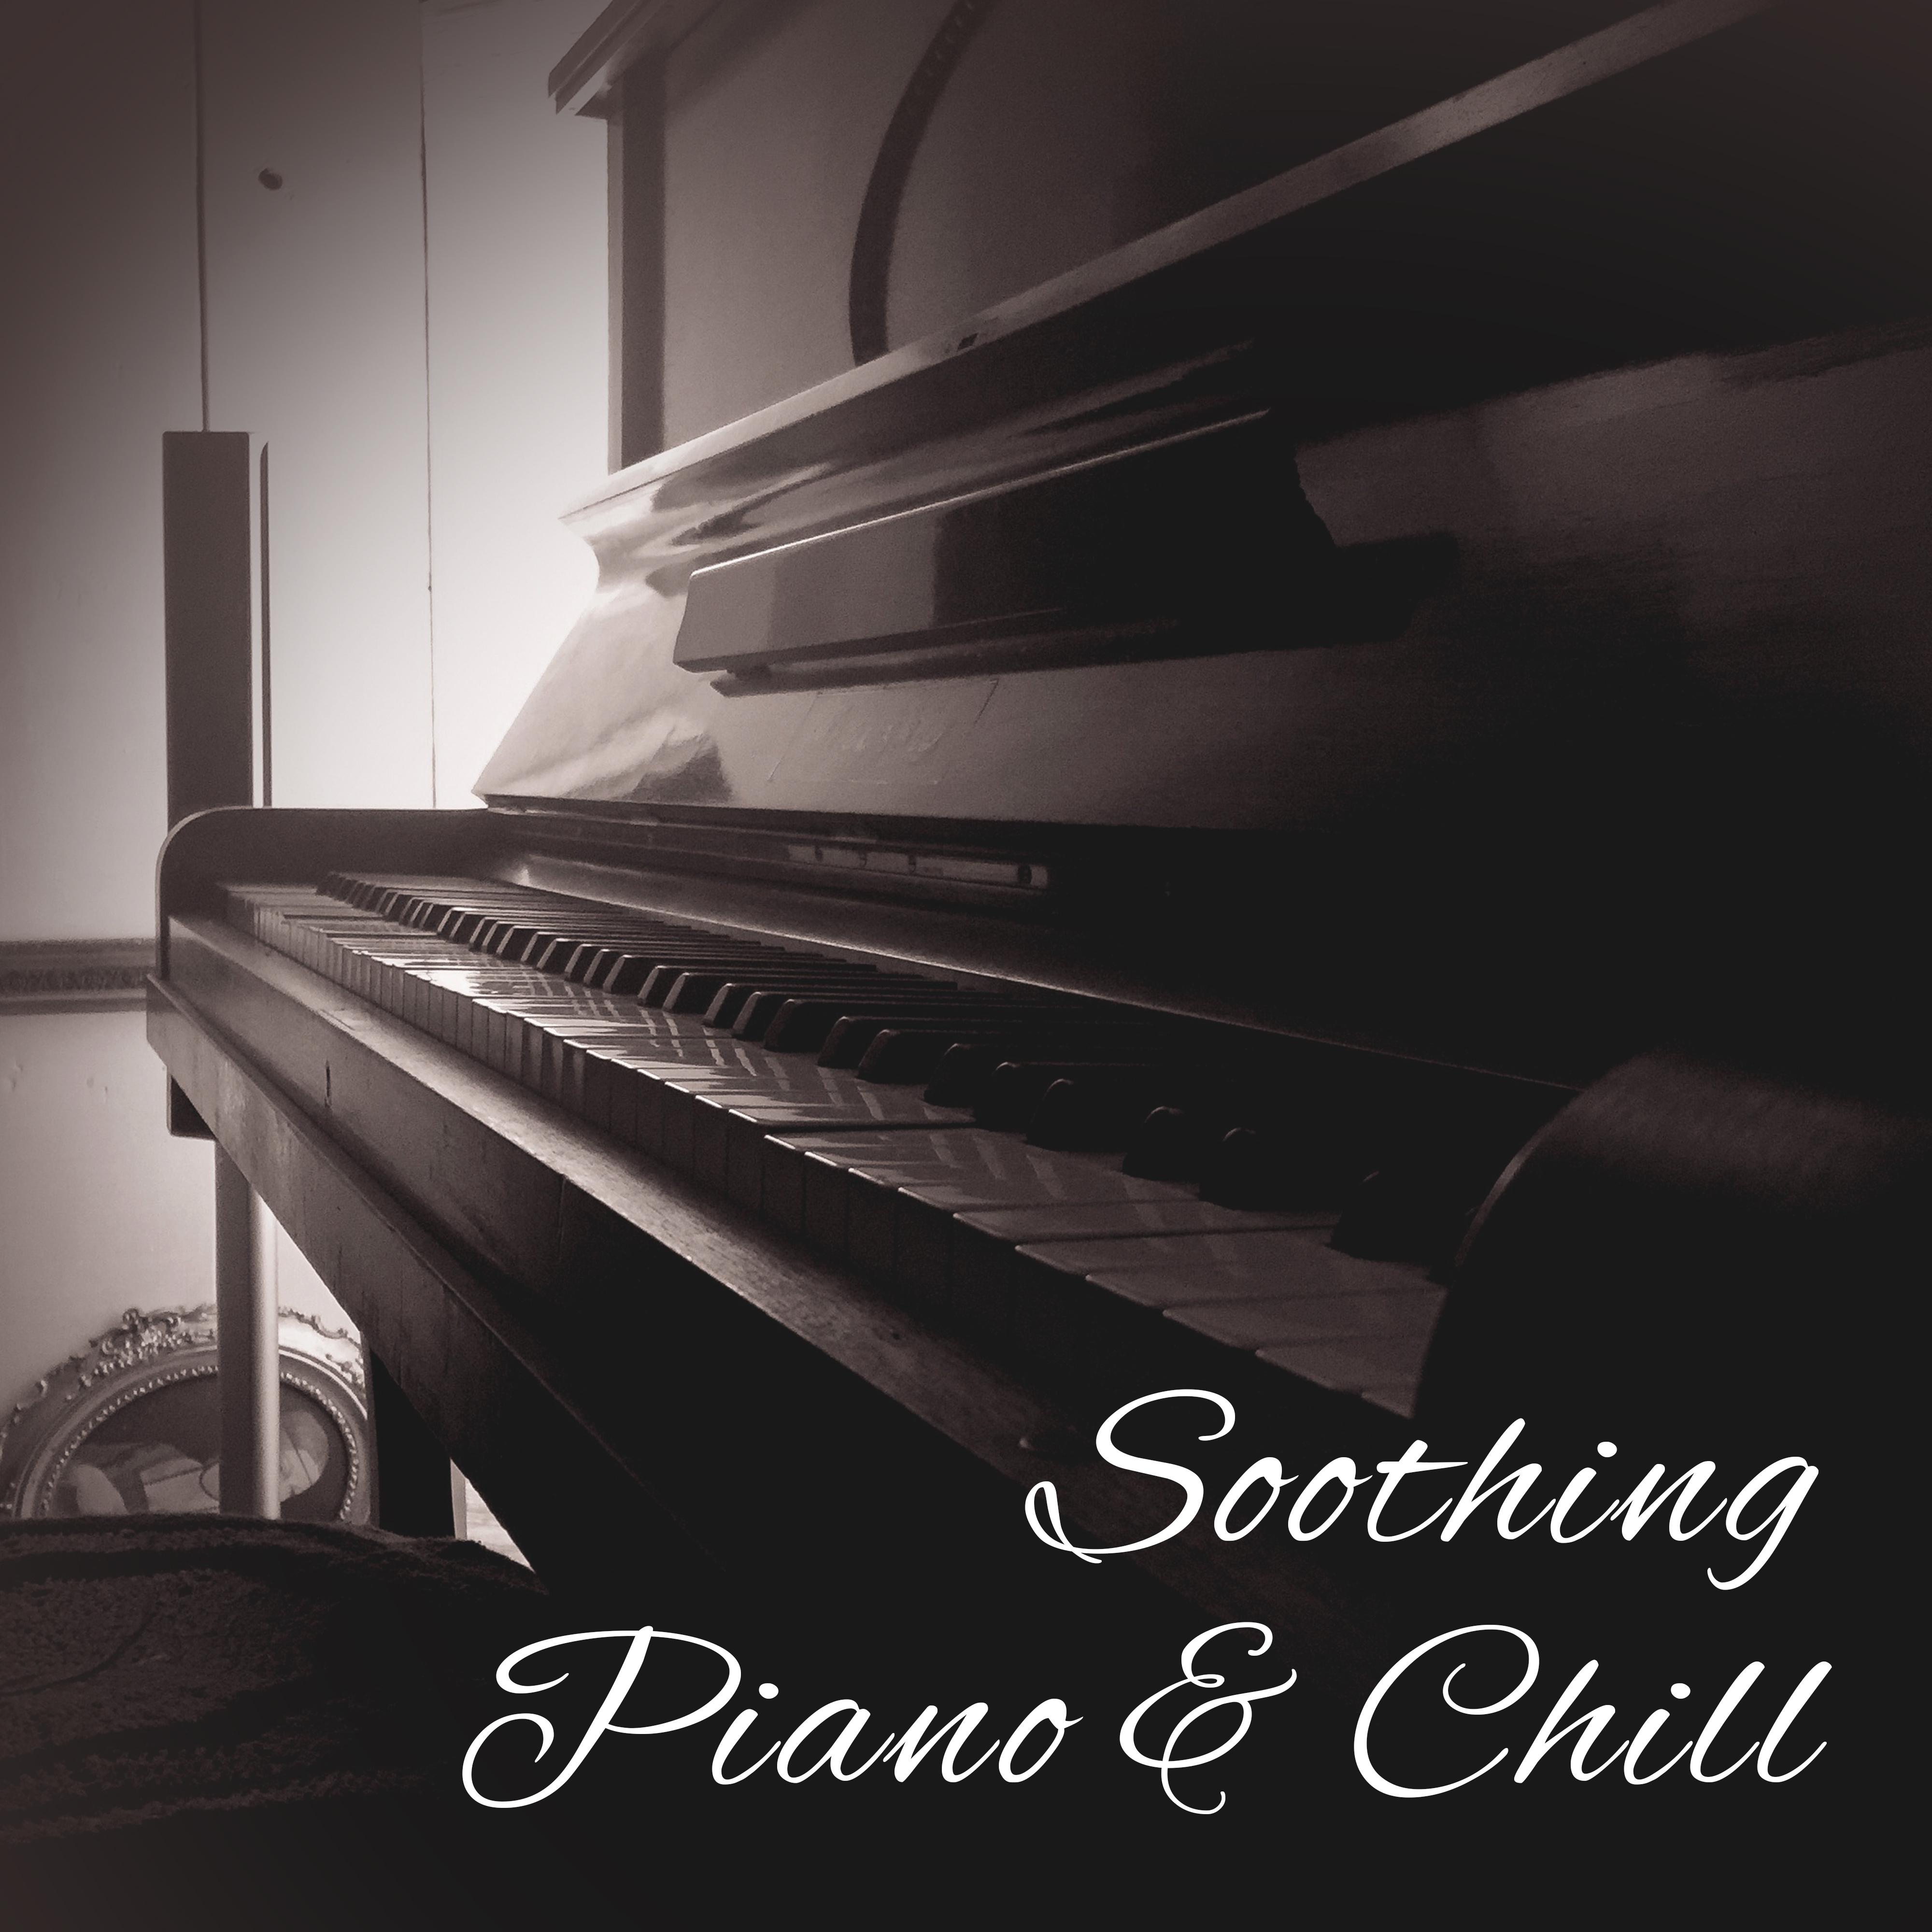 Soothing Piano & Chill – Restaurant Jazz, Ambient Music, Best Smooth Jazz for Relaxation, Gentle Piano, Mellow Jazz